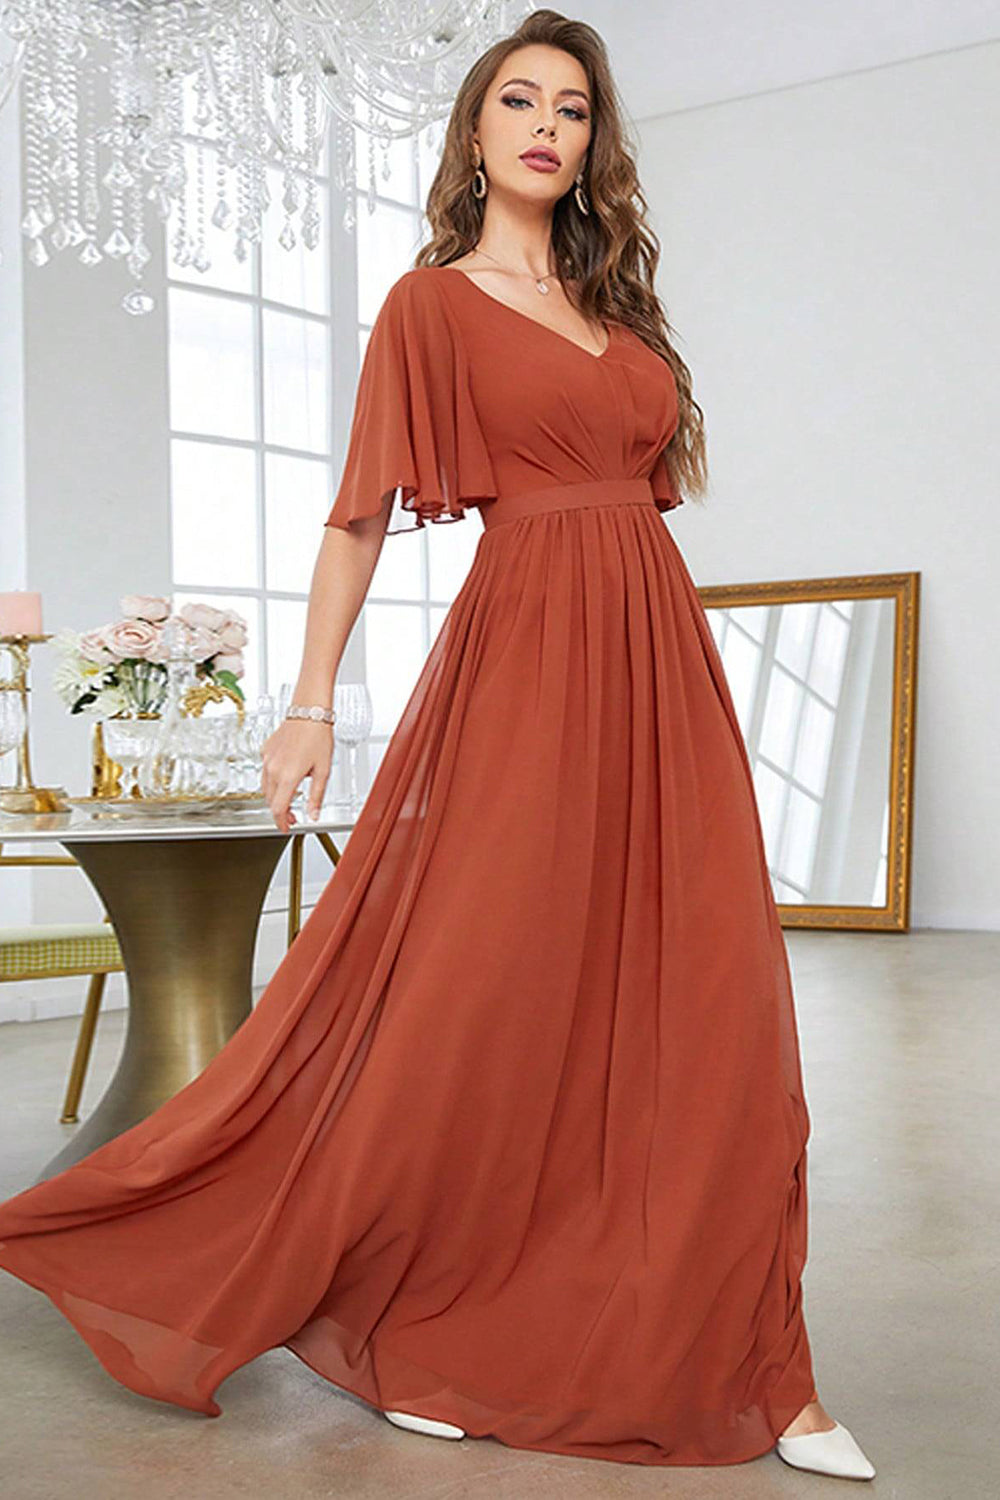 Brick Red A-Line V-Neck Pleated Prom Dress With Short Sleeves